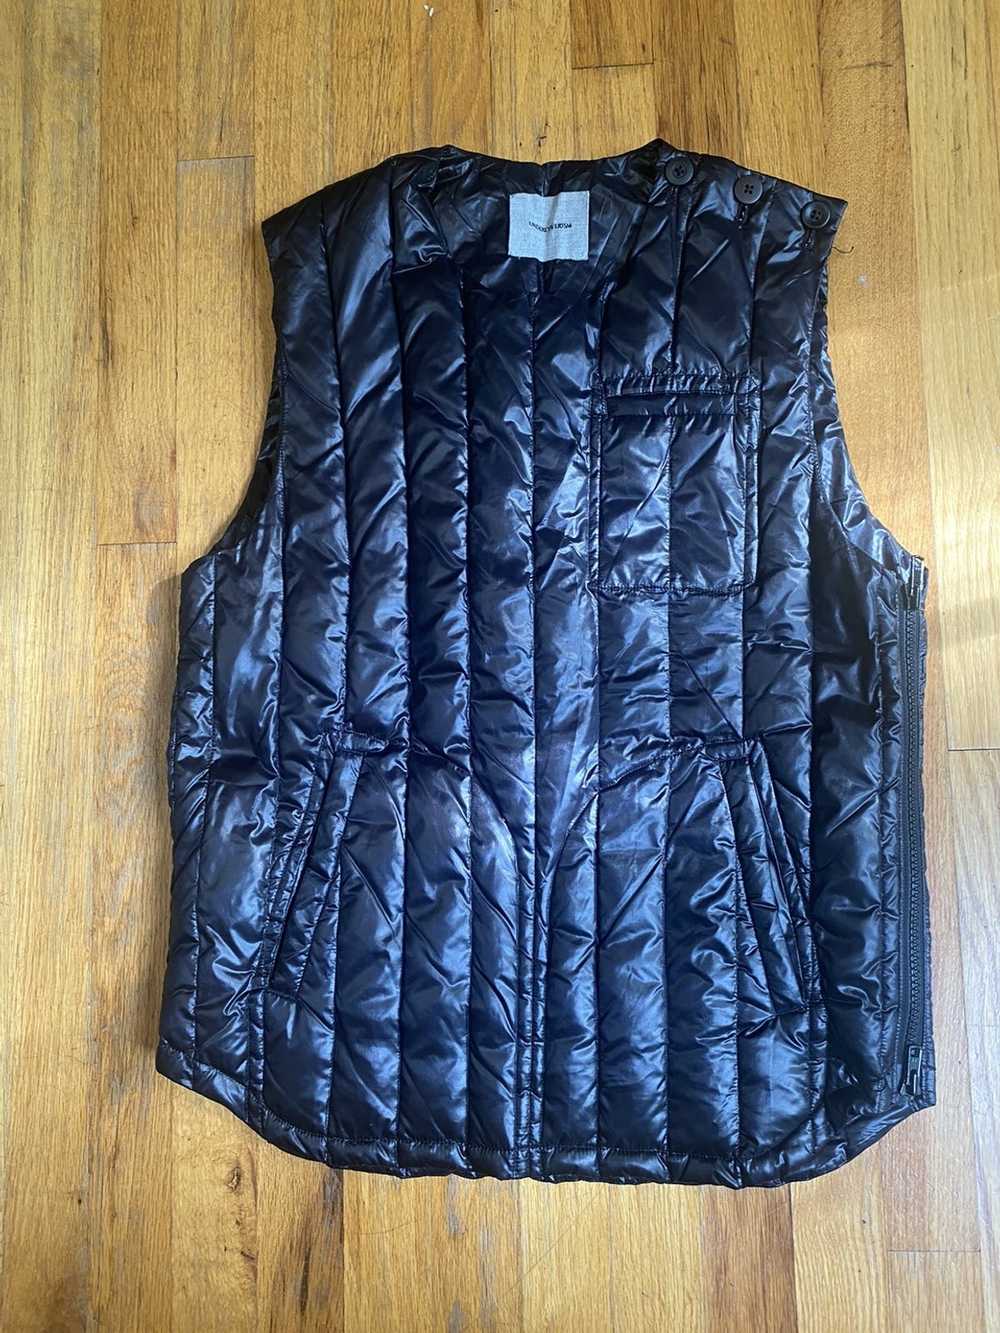 Undercover Undercover tactical vest - image 2